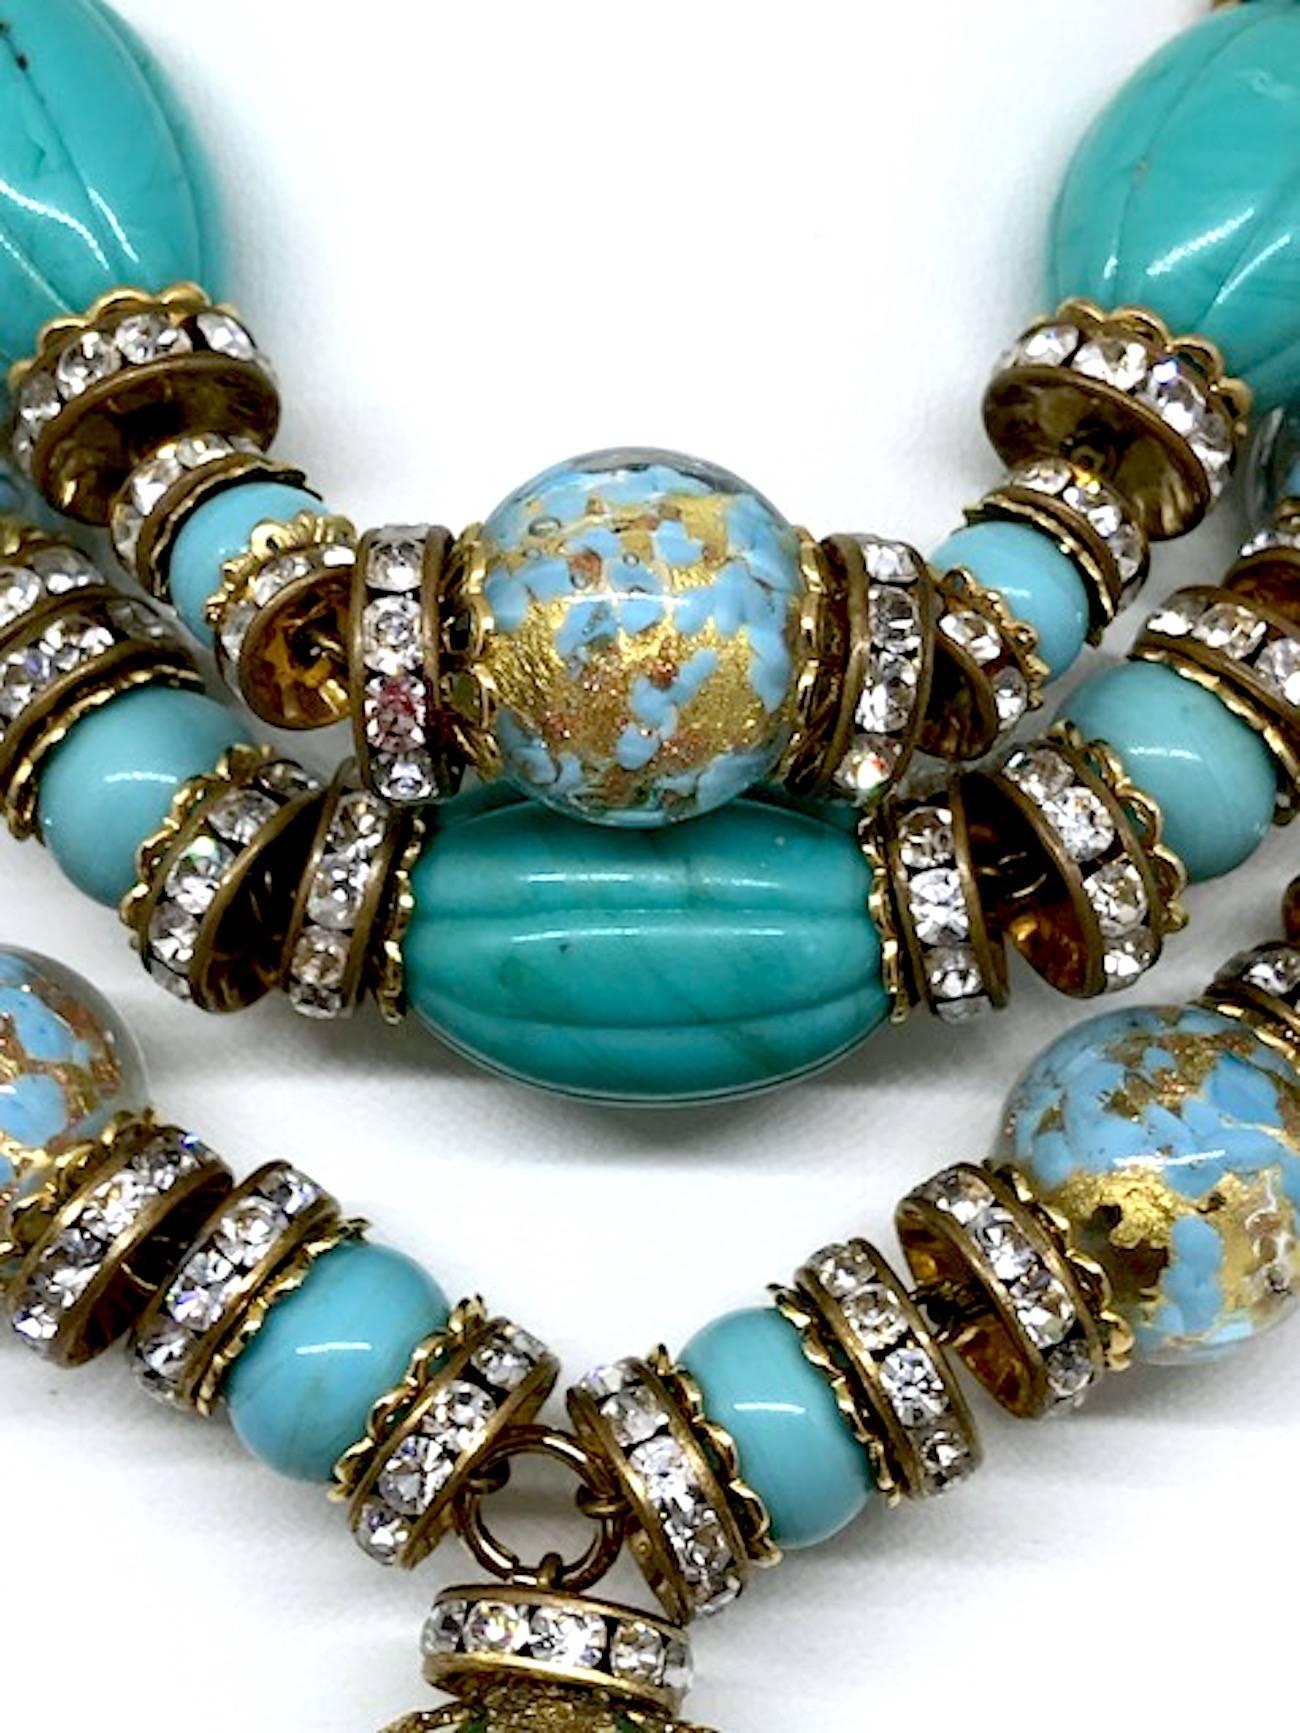 A true statement necklace is this three strand Venetian glass bead and rhinestone rondelle chocker necklace from the 1980s. Attributed to De Liguoro Jewelry. Part of the large collection of jewelry from this company owned by Elsa Martinelli. Large